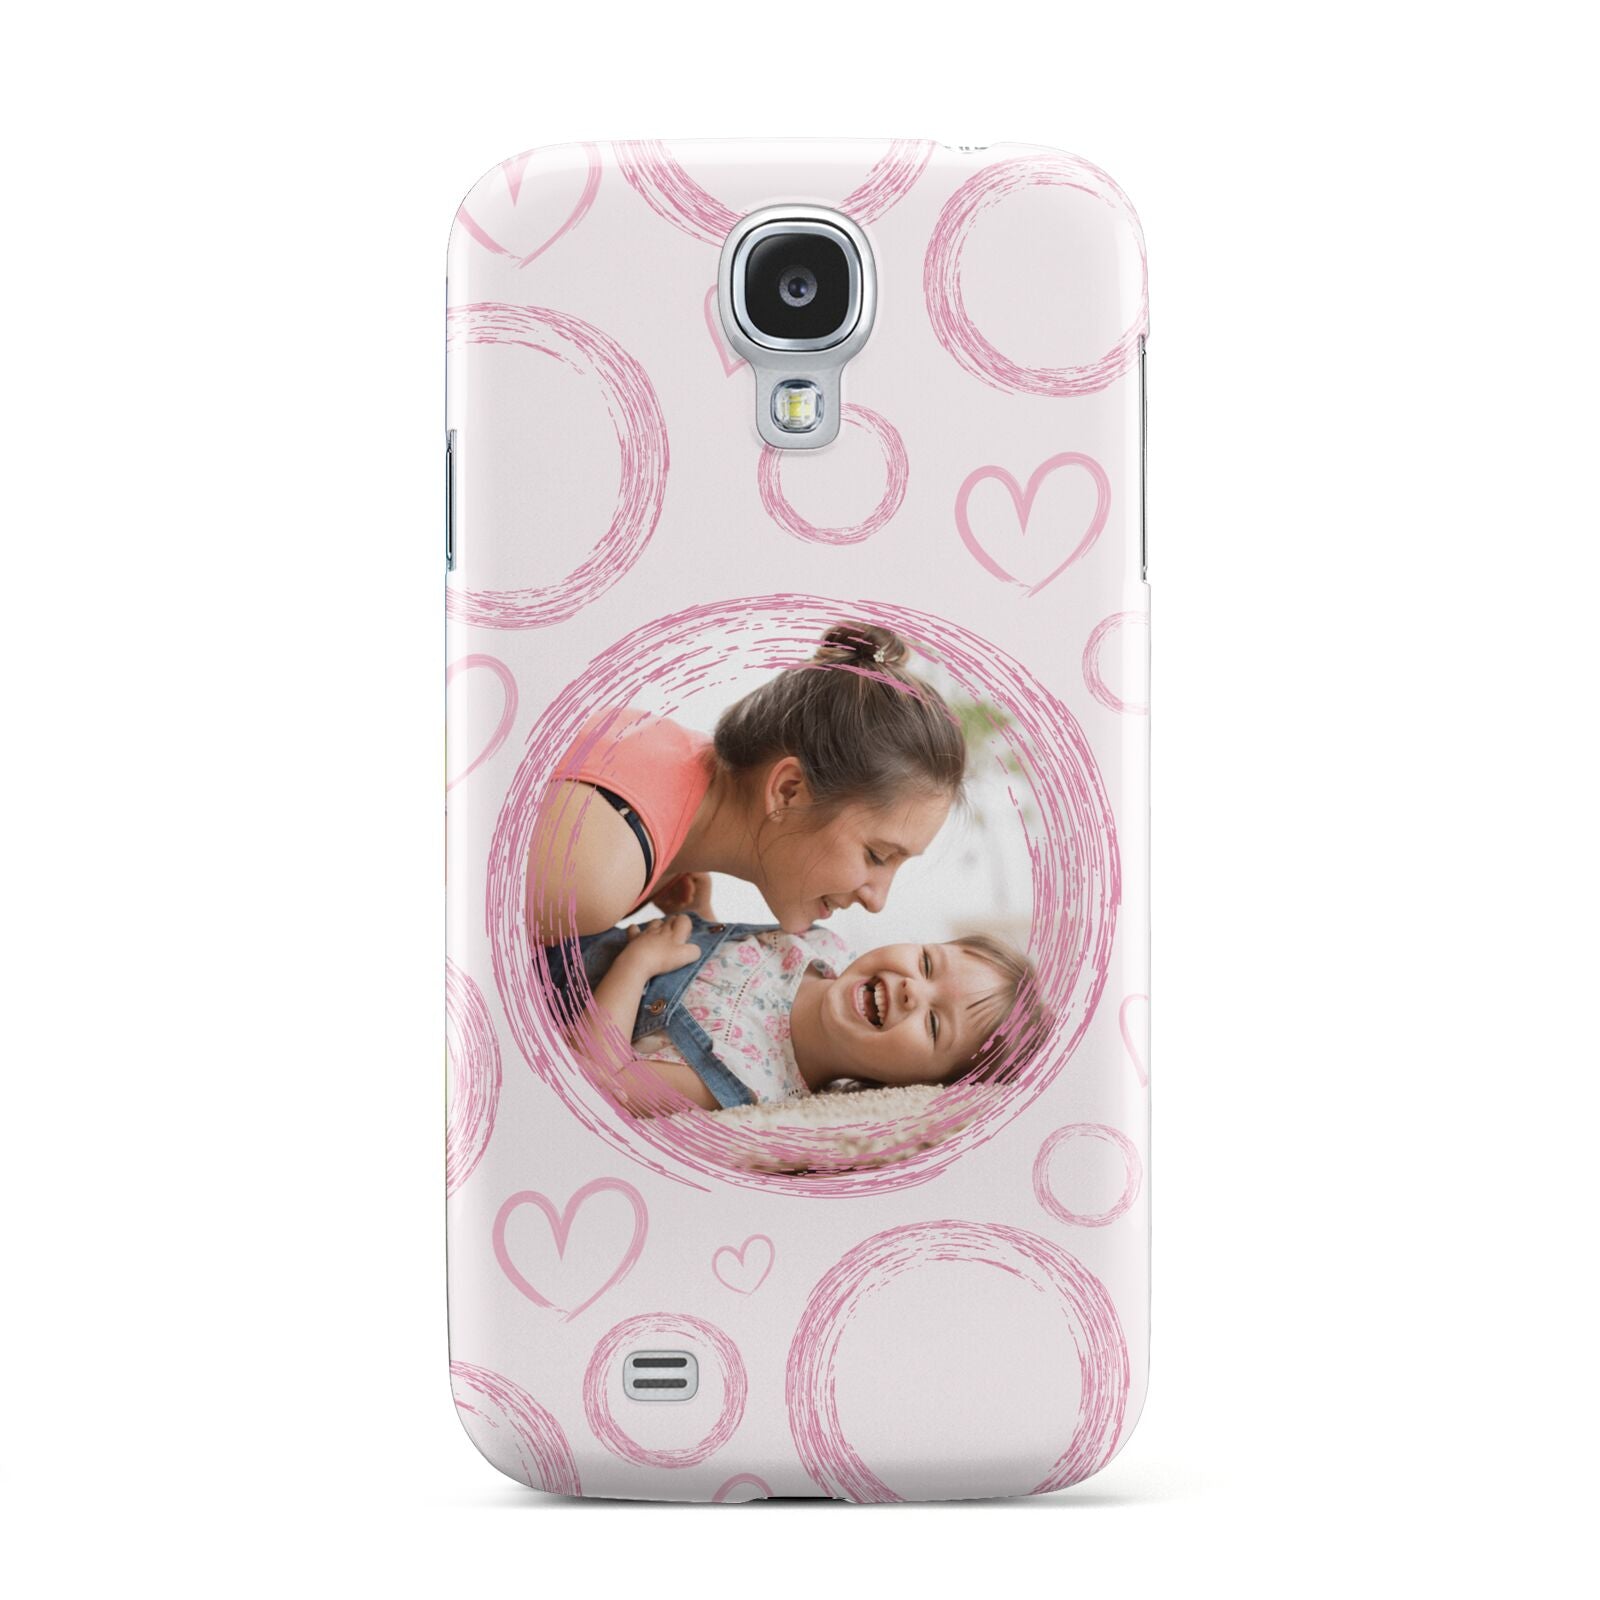 Pink Love Hearts Photo Personalised Samsung Galaxy S4 Case